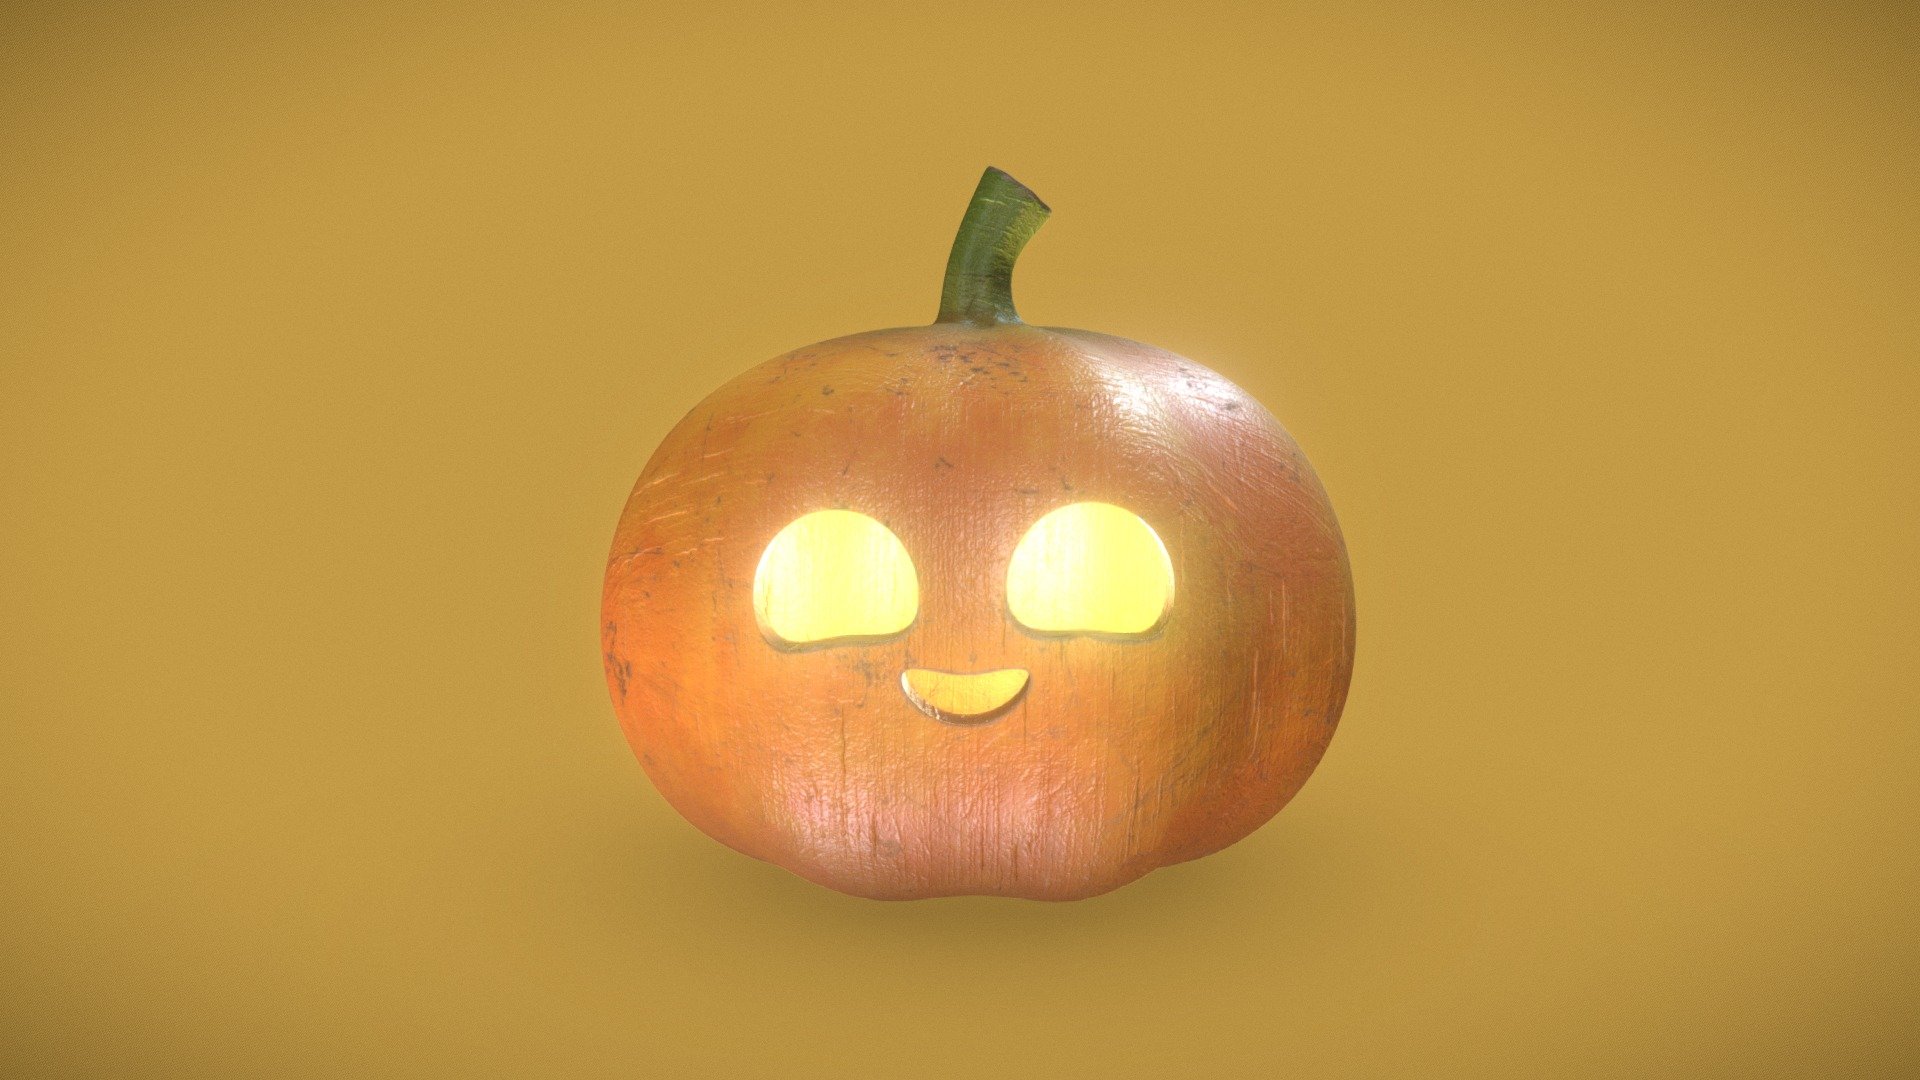 This is a cute Jack-o'-lantern than i made in blender and texturised in substance painter - cute Jack-o'-lantern - 3D model by Matth_mat 3d model